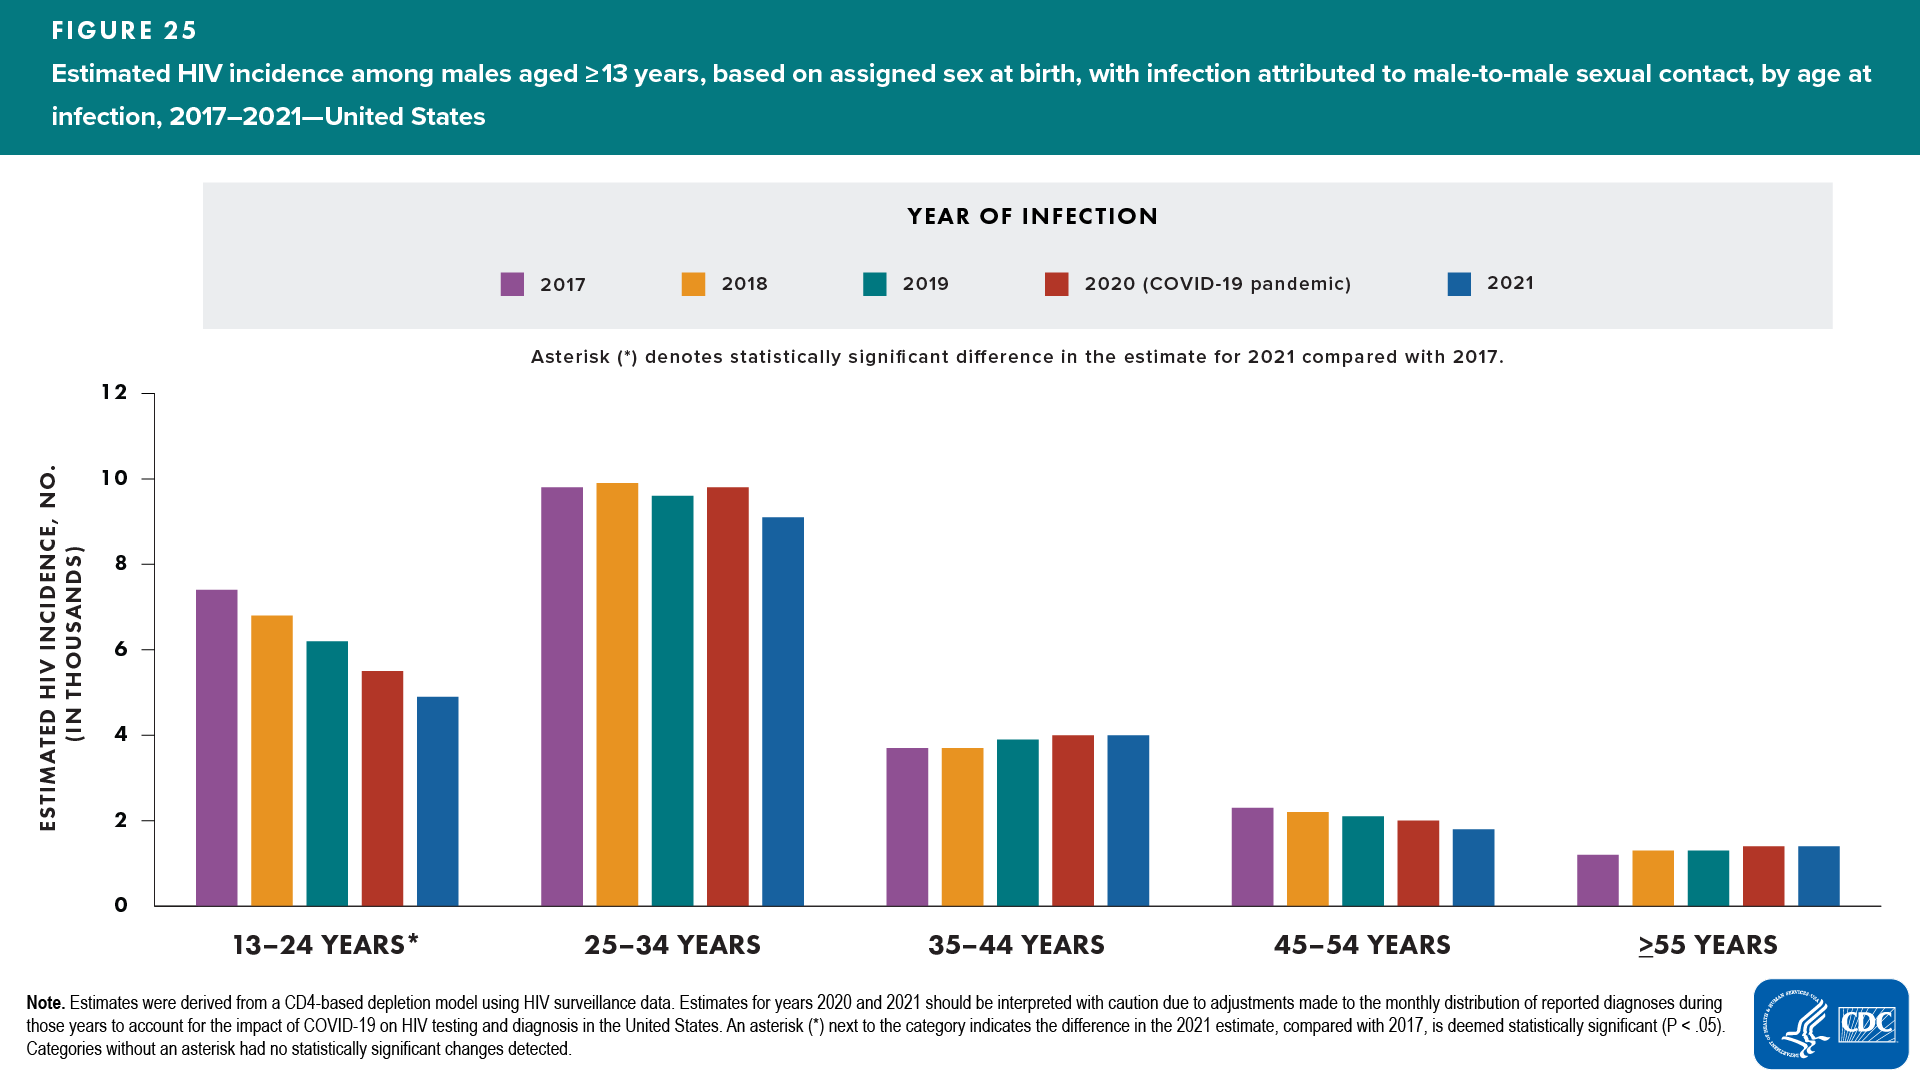 Figure 25. Estimated HIV incidence among males aged ≥13 years, based on assigned sex at birth, with infection attributed to male-to-male sexual contact, by age, 2017–2021—United States